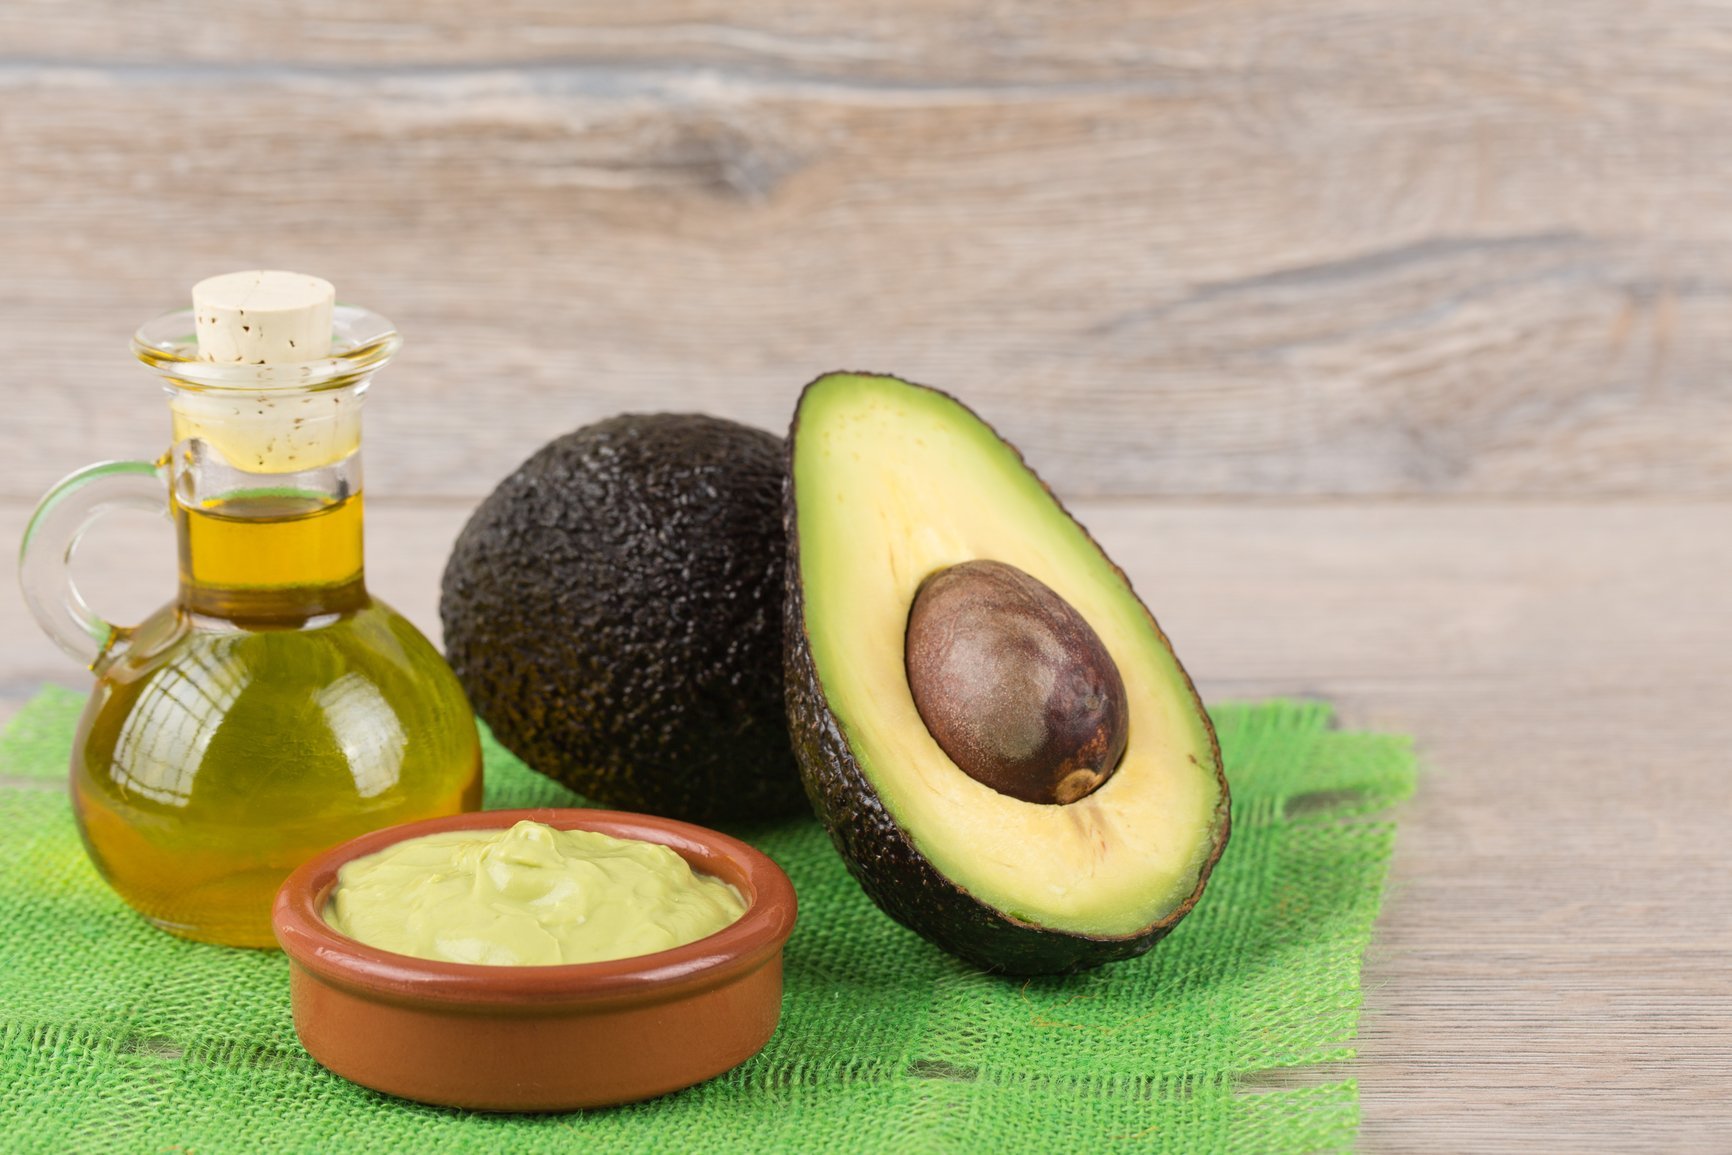 The Global Avocado Oil Market Is Estimated To Witness High Growth Owing To Rising Consumer Awareness about Health Benefits and Increasing Demand for Natural and Organic Products